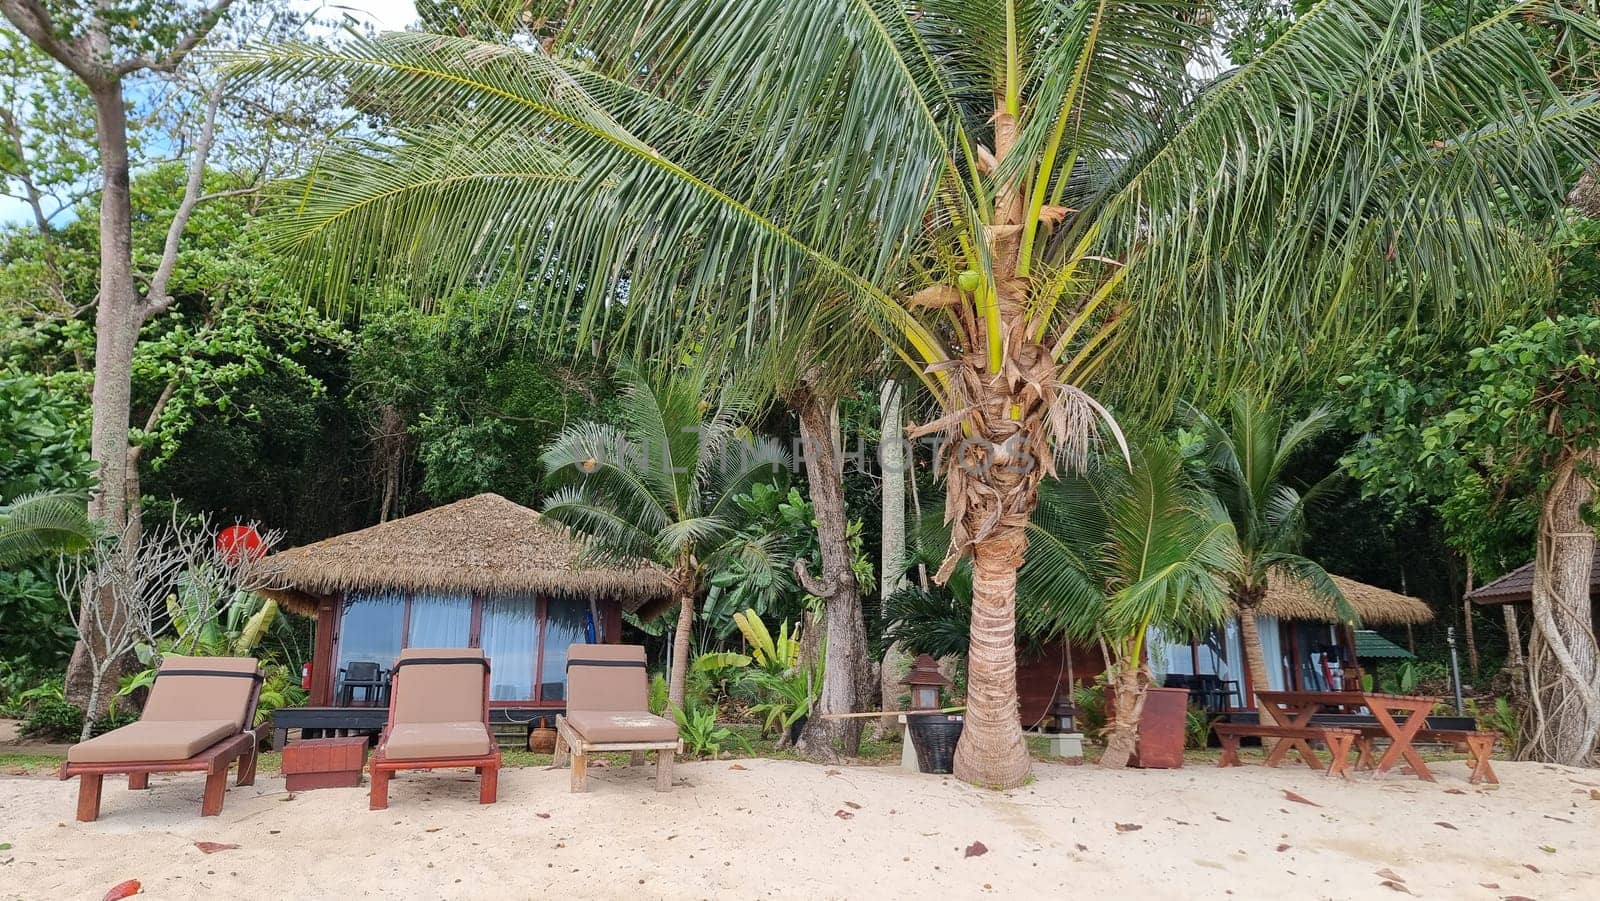 A sandy beach with lounge chairs scattered under swaying palm trees, offering a serene escape for relaxation and enjoying the sun and sound of the ocean waves by fokkebok